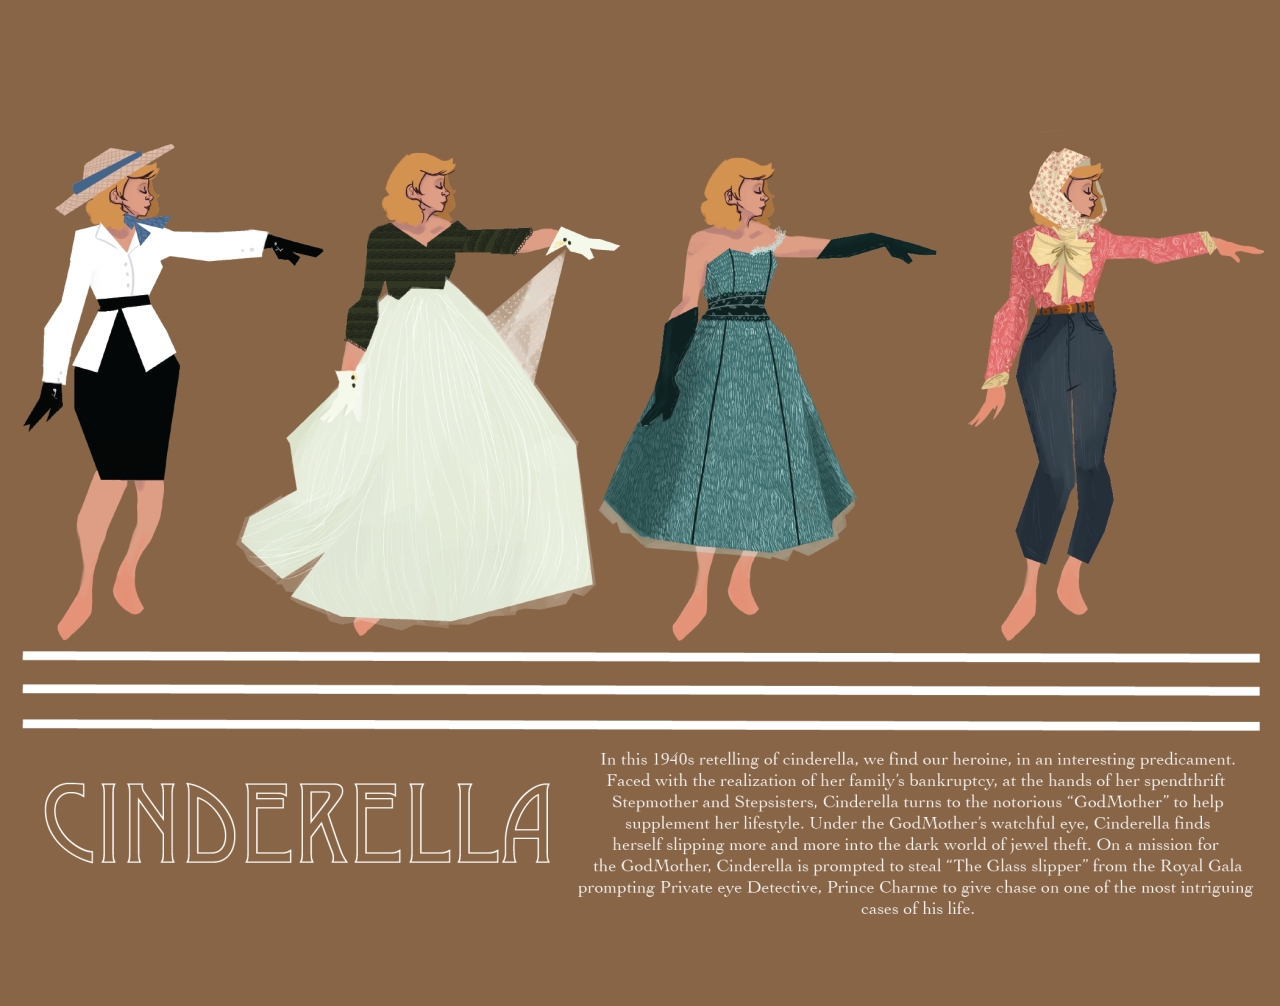 redesign of Cinderella as though she was from the 1940s, done for a costuming project art by: Monique Steele moniquesteele.tumblr.com